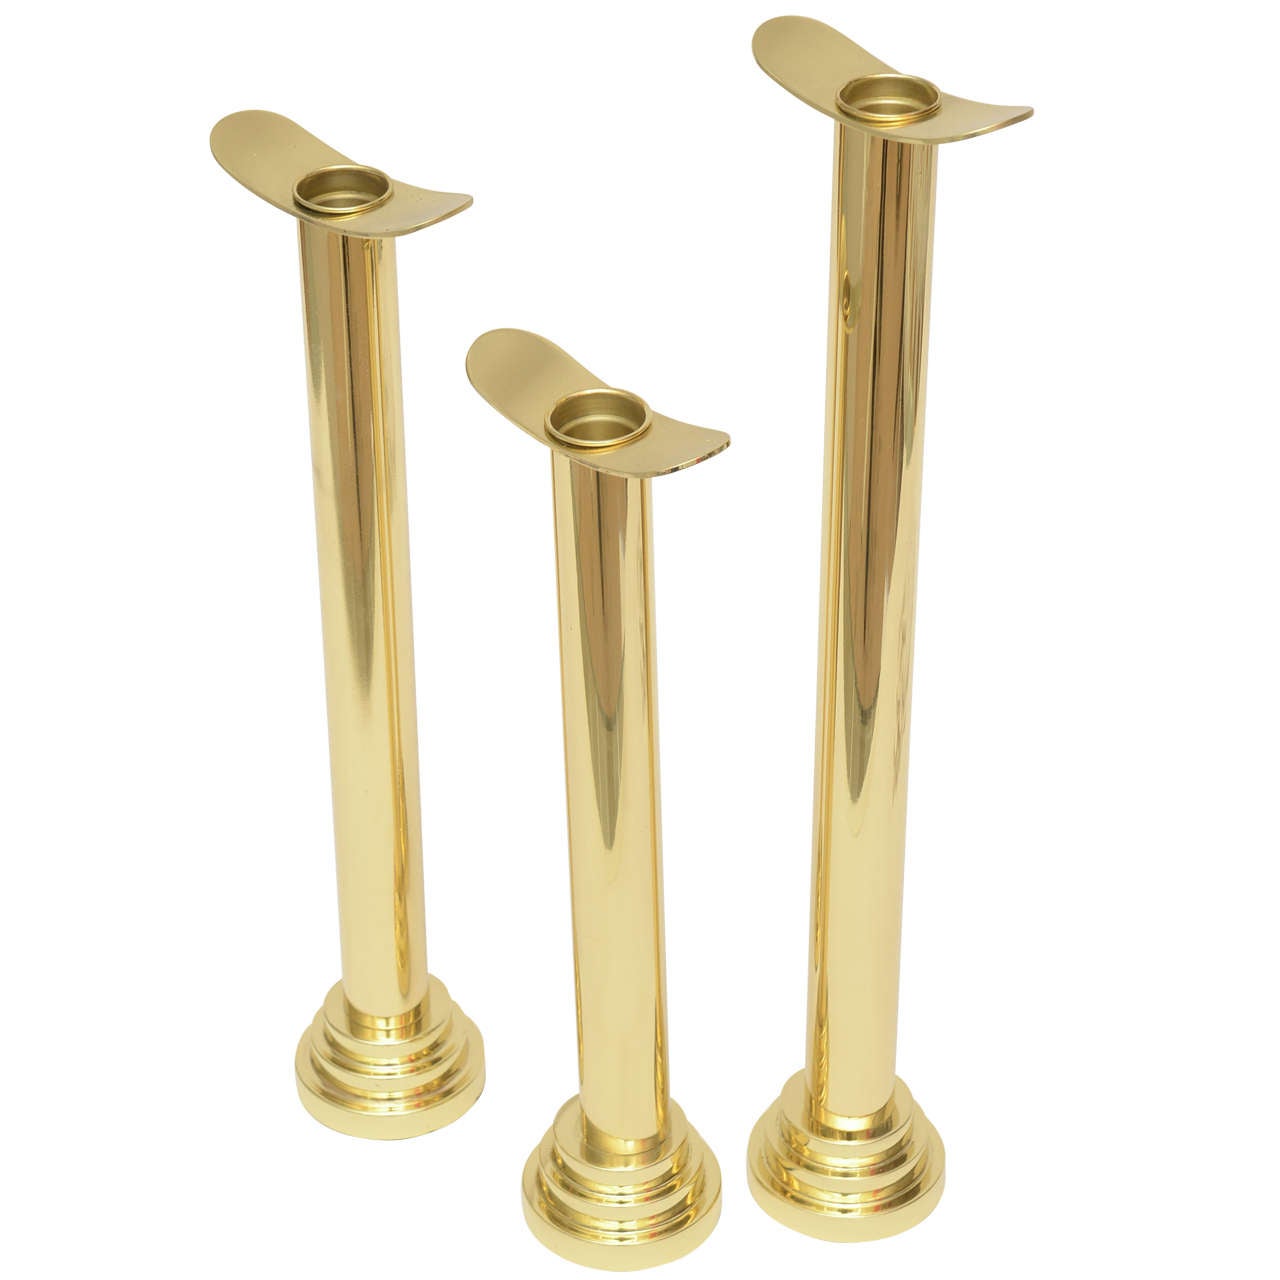 Trio of Graduated Polished Brass Sculptural Candlesticks / SATURDAY SALE